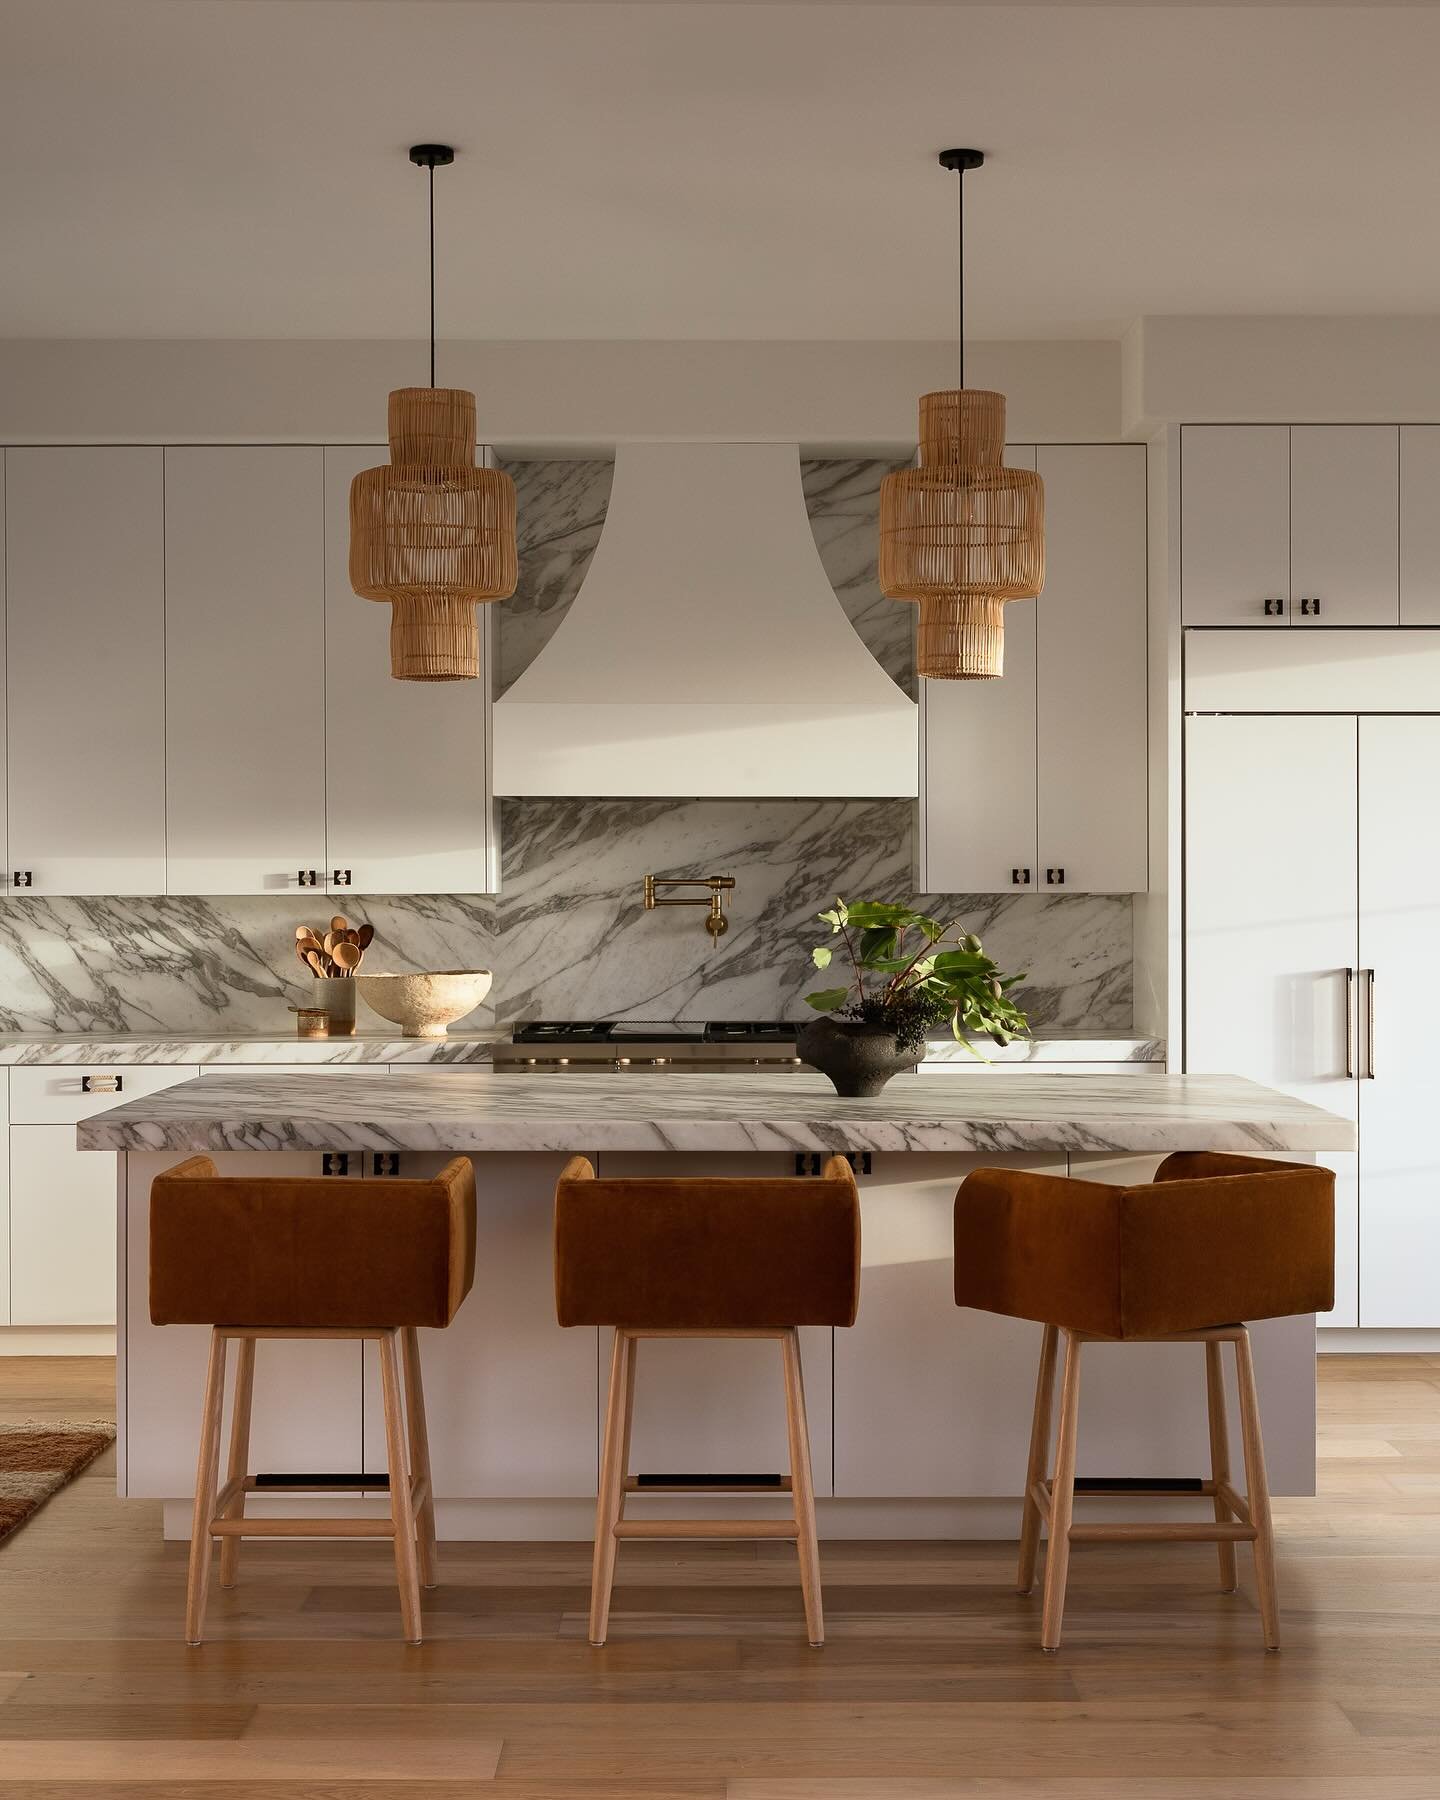 Redesigning one kitchen after another! The best part of any kitchen remodel has to be choosing which stone you&rsquo;re going to use, right?! The veining in the Calacatta Vagli Marble we chose, as the countertops and backsplash, creates the perfect r